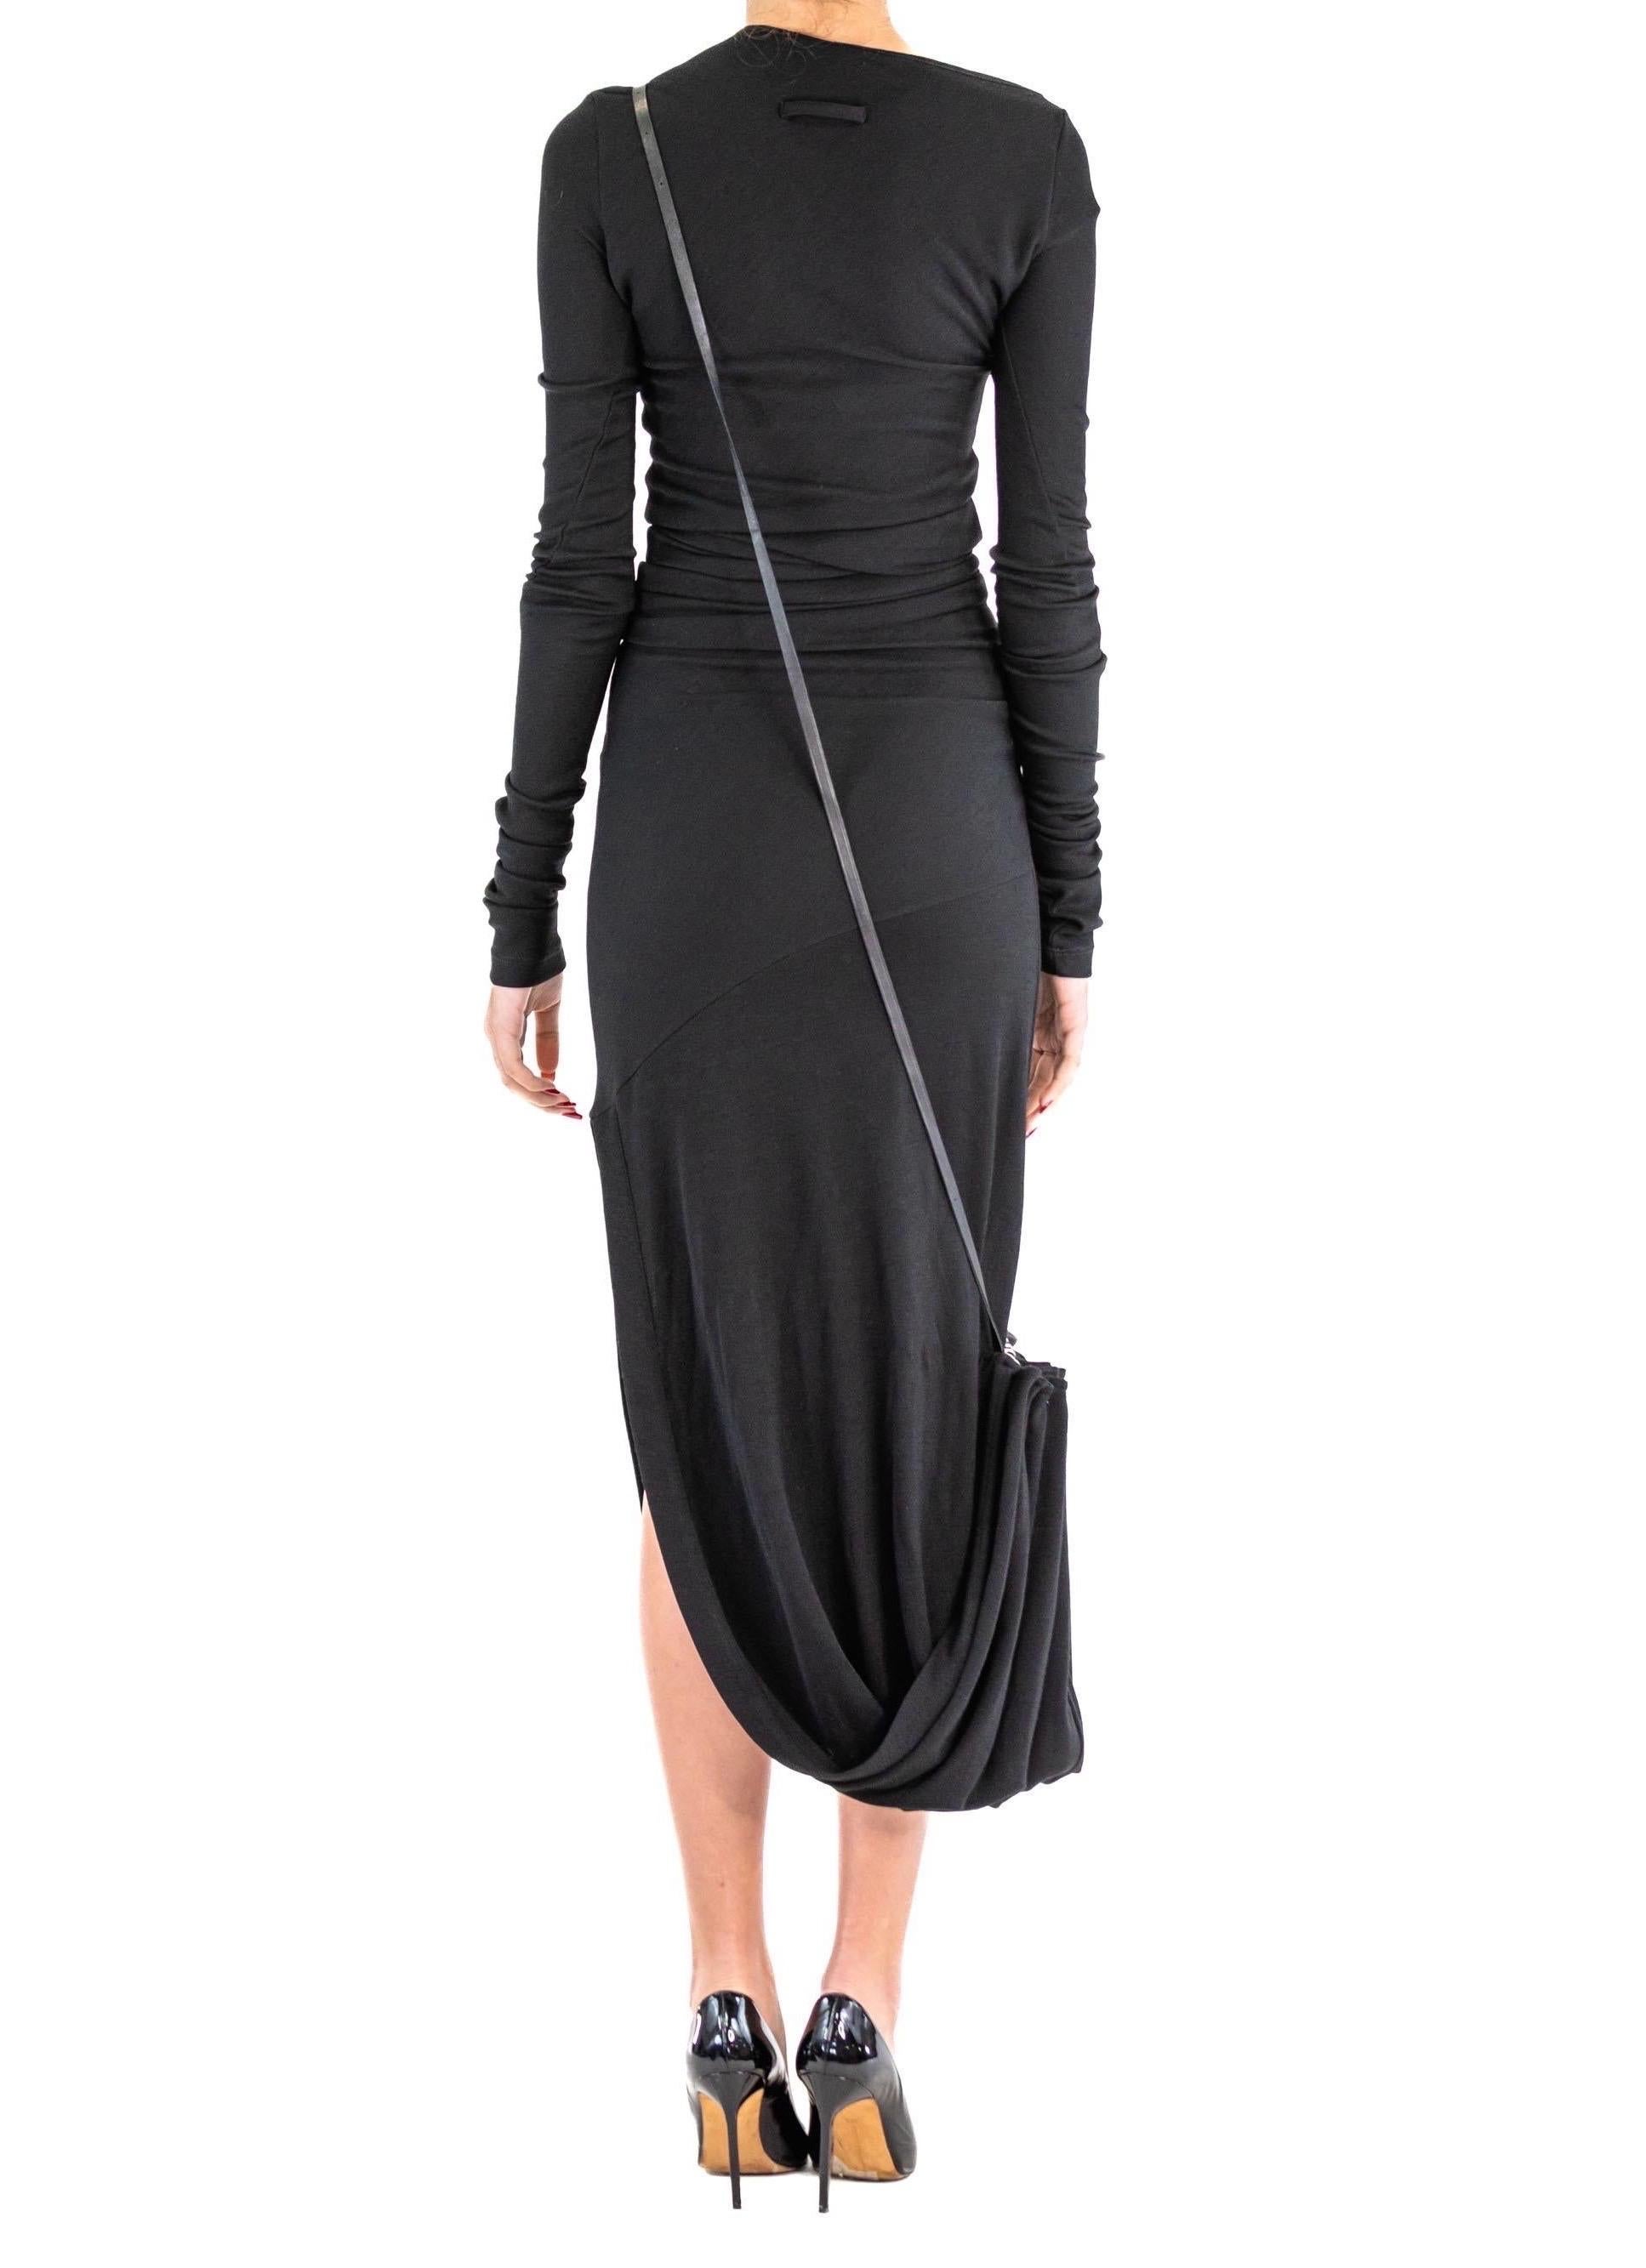 1990S JEAN PAUL GAULTIER Black Wool Blend Knit Dress With Draped Sash For Sale 2